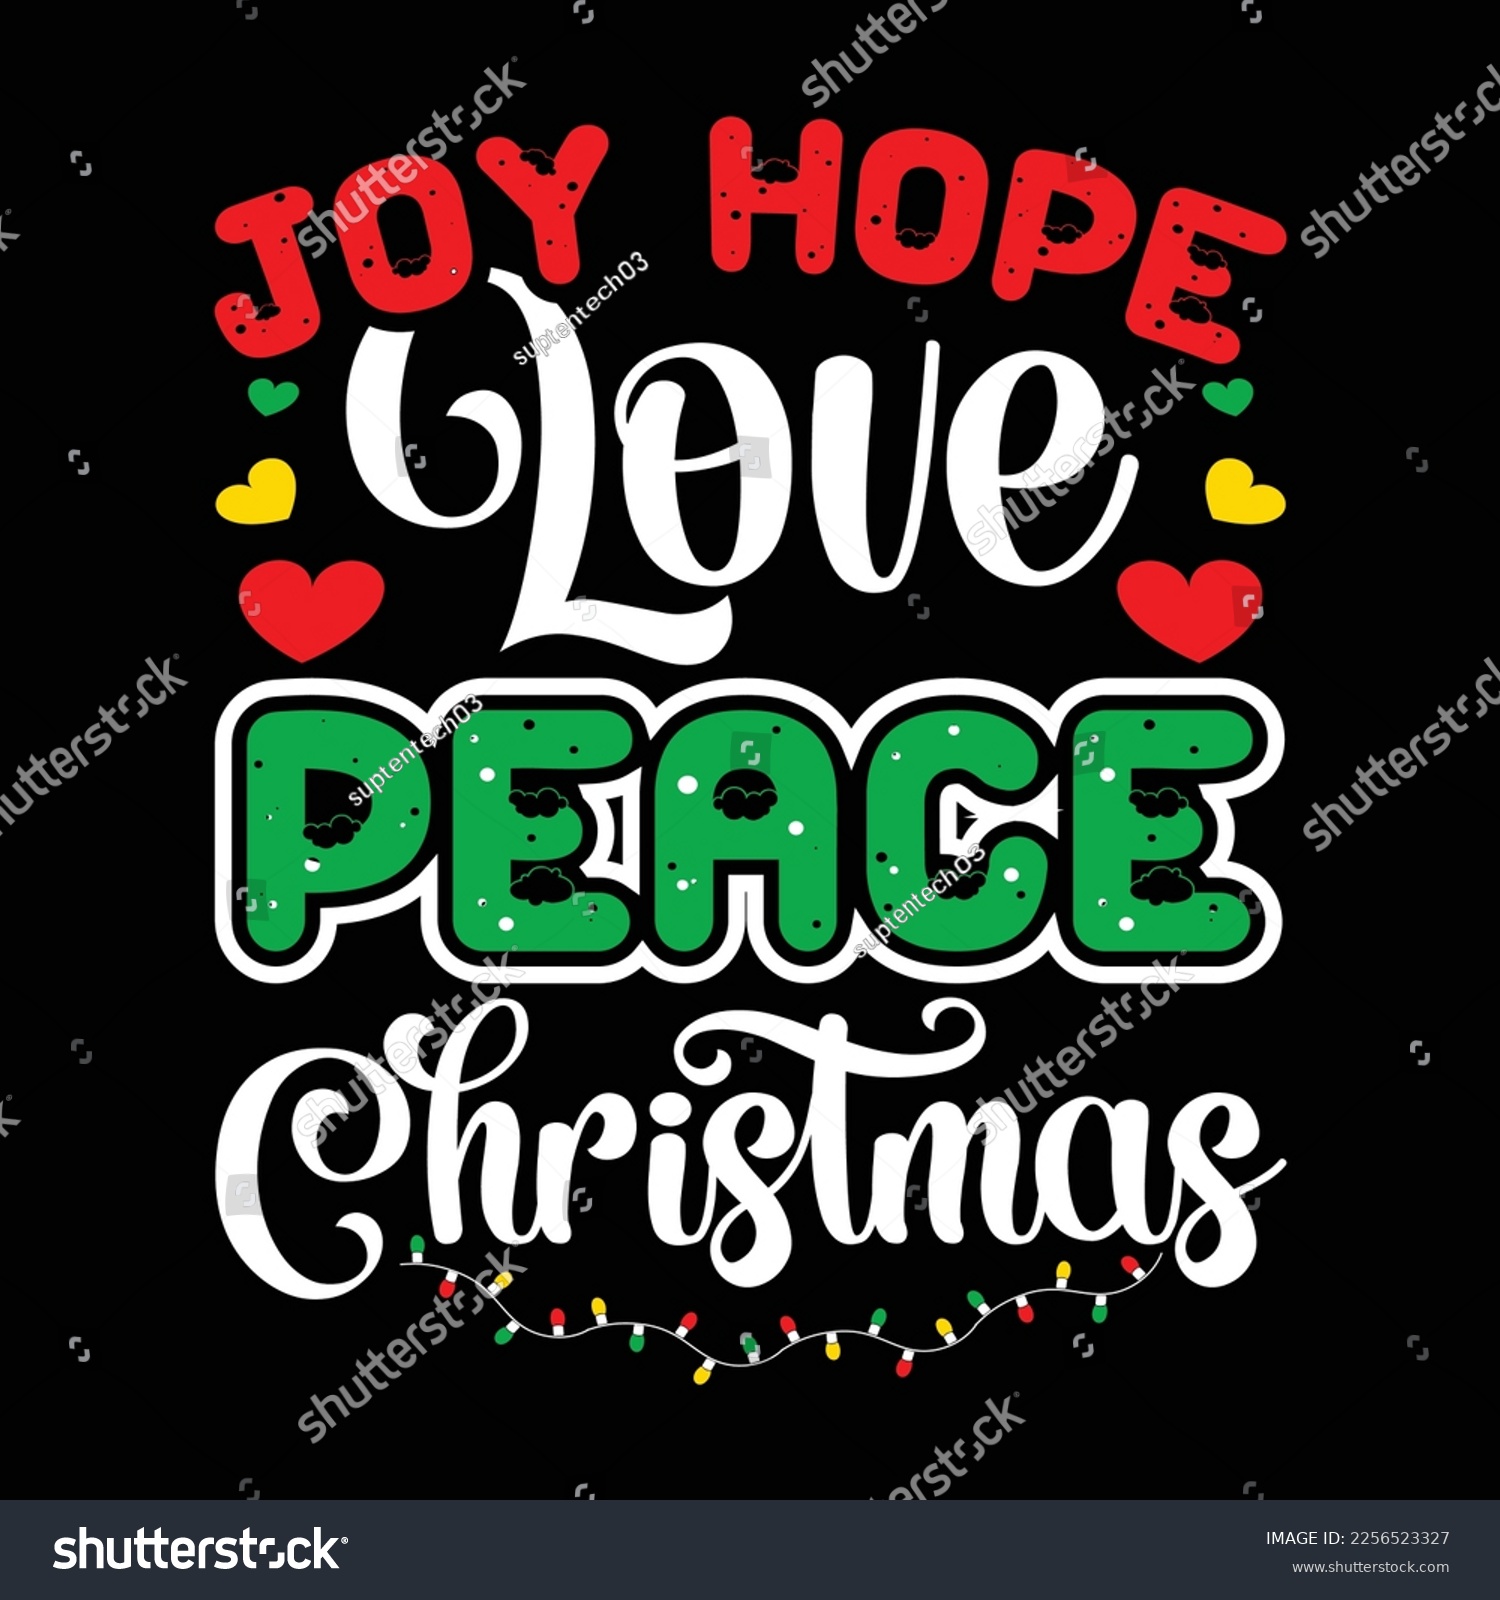 SVG of Joy Hope Love Peace Christmas, Merry Christmas shirts Print Template, Xmas Ugly Snow Santa Clouse New Year Holiday Candy Santa Hat vector illustration for Christmas hand lettered svg